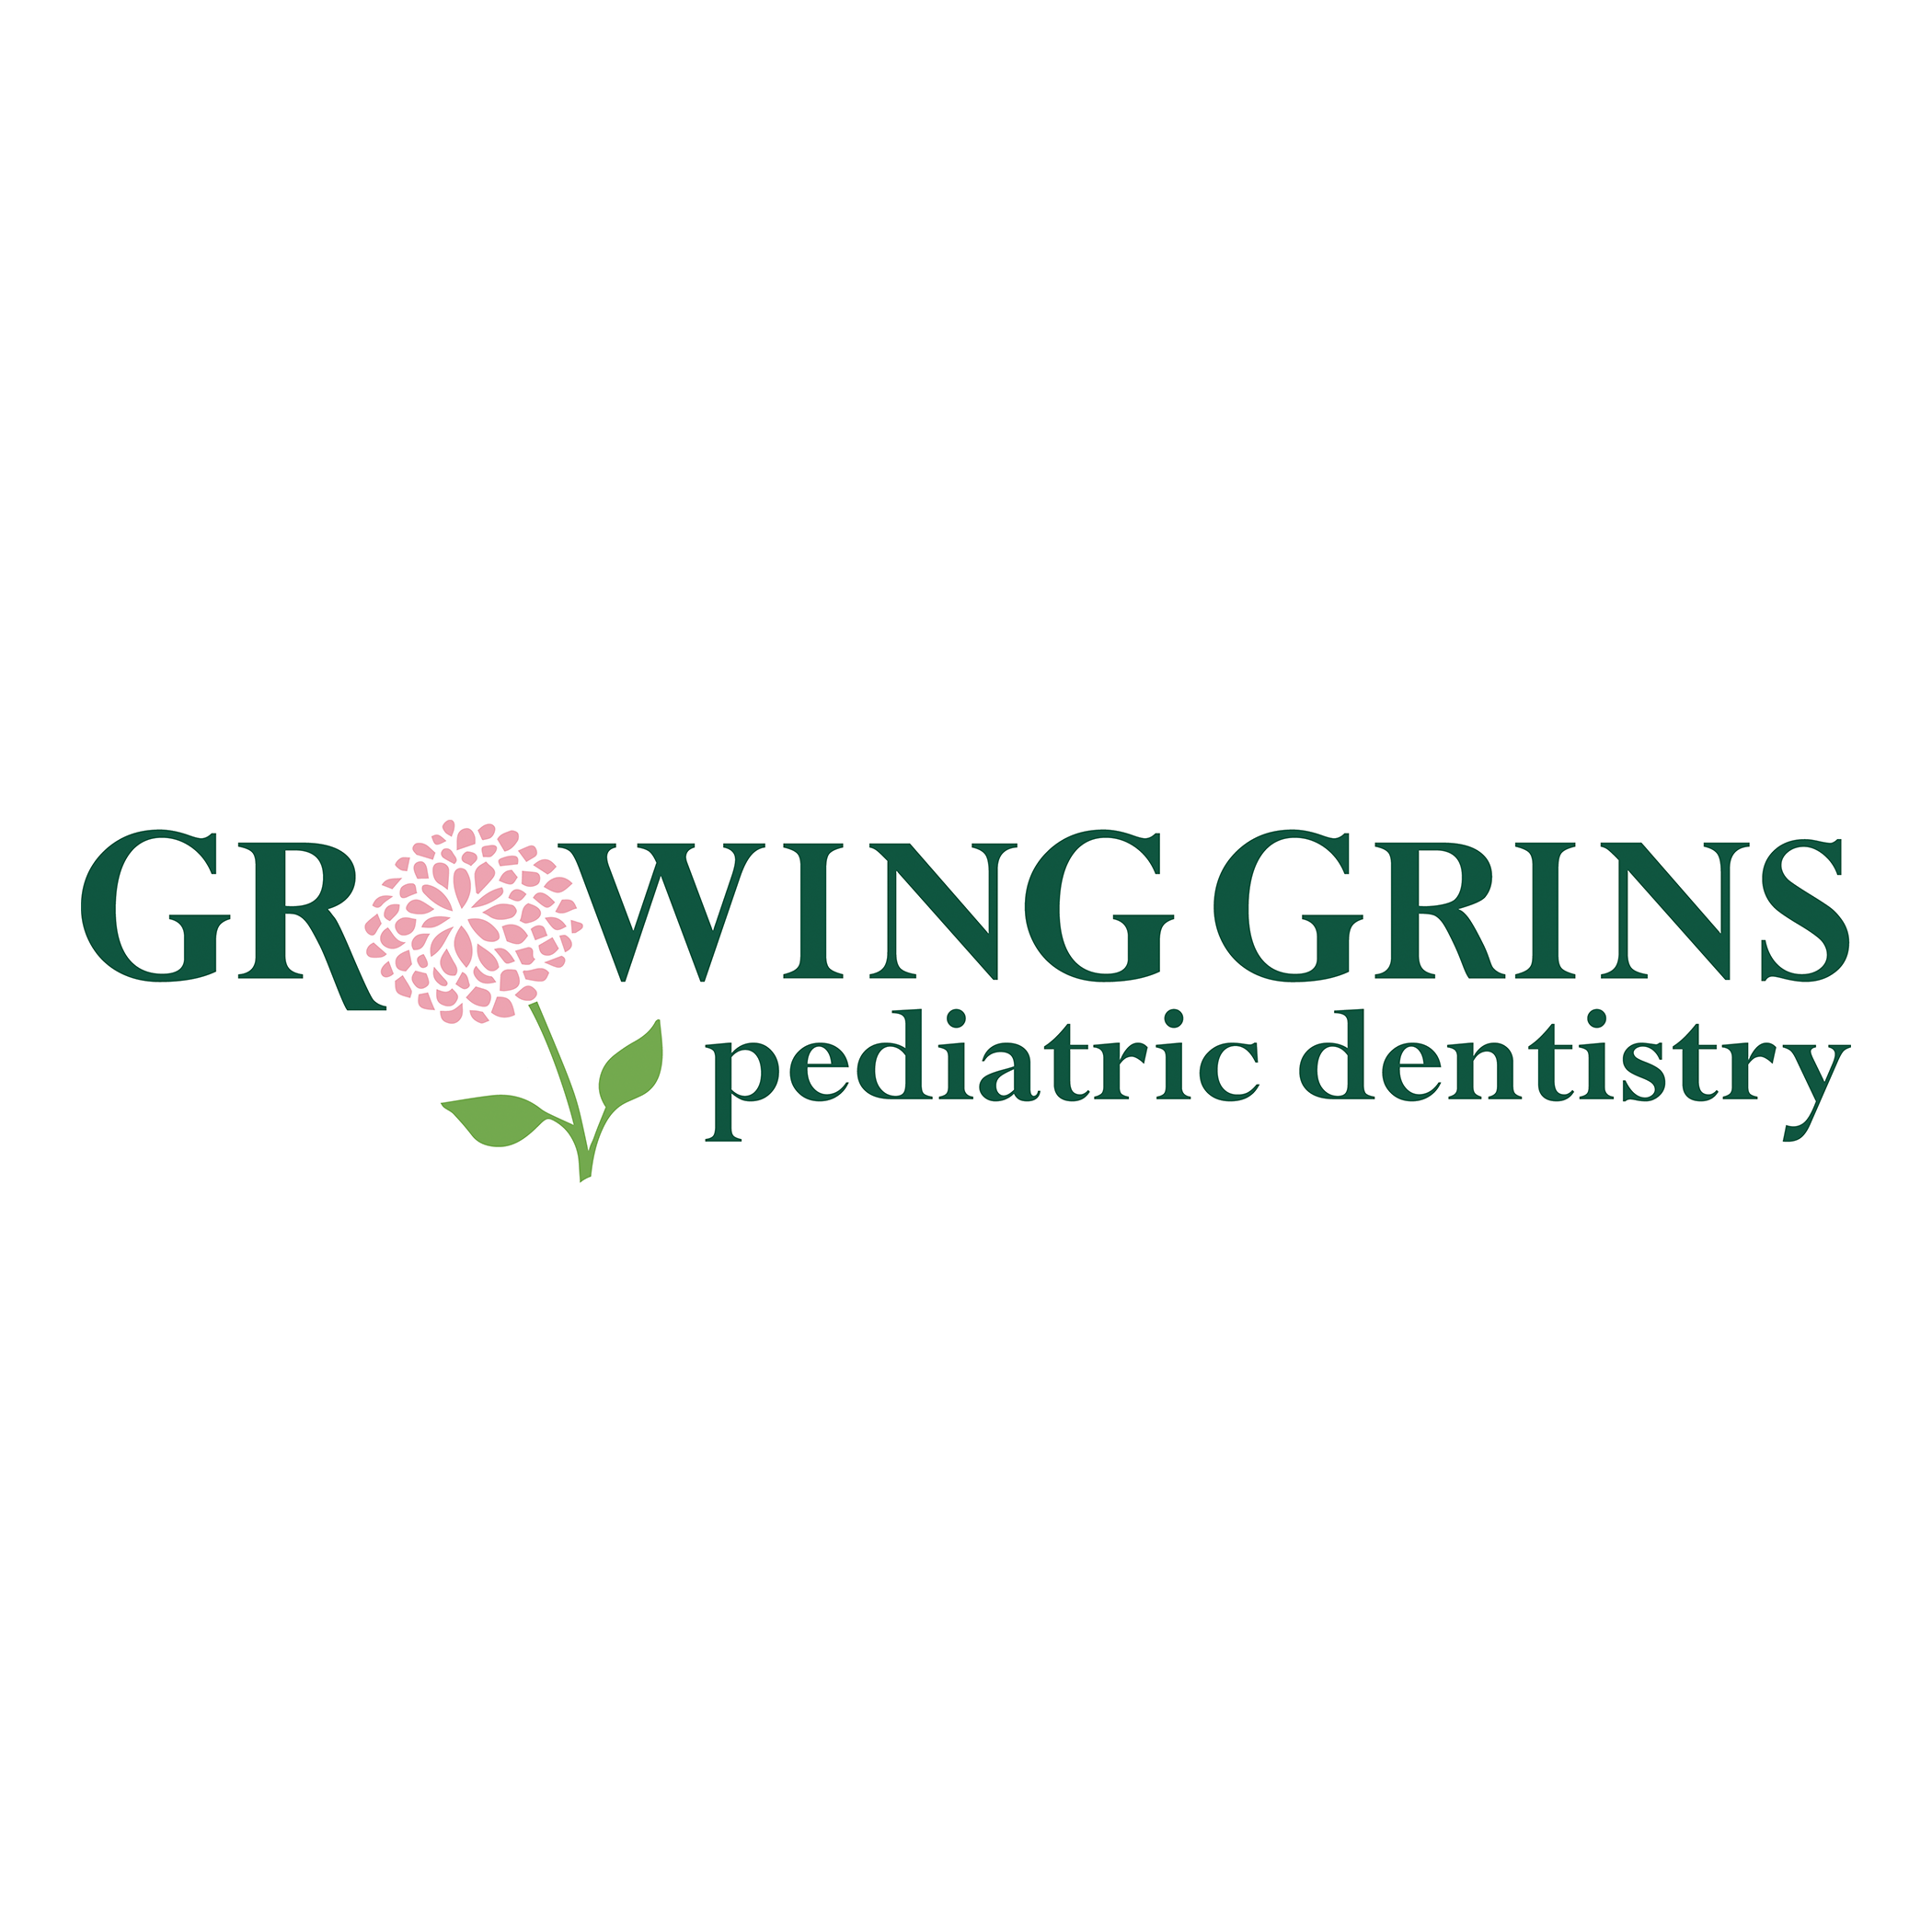 Growing Grins Pediatric Dentistry - Westfield, IN 46074 - (317)896-9600 | ShowMeLocal.com